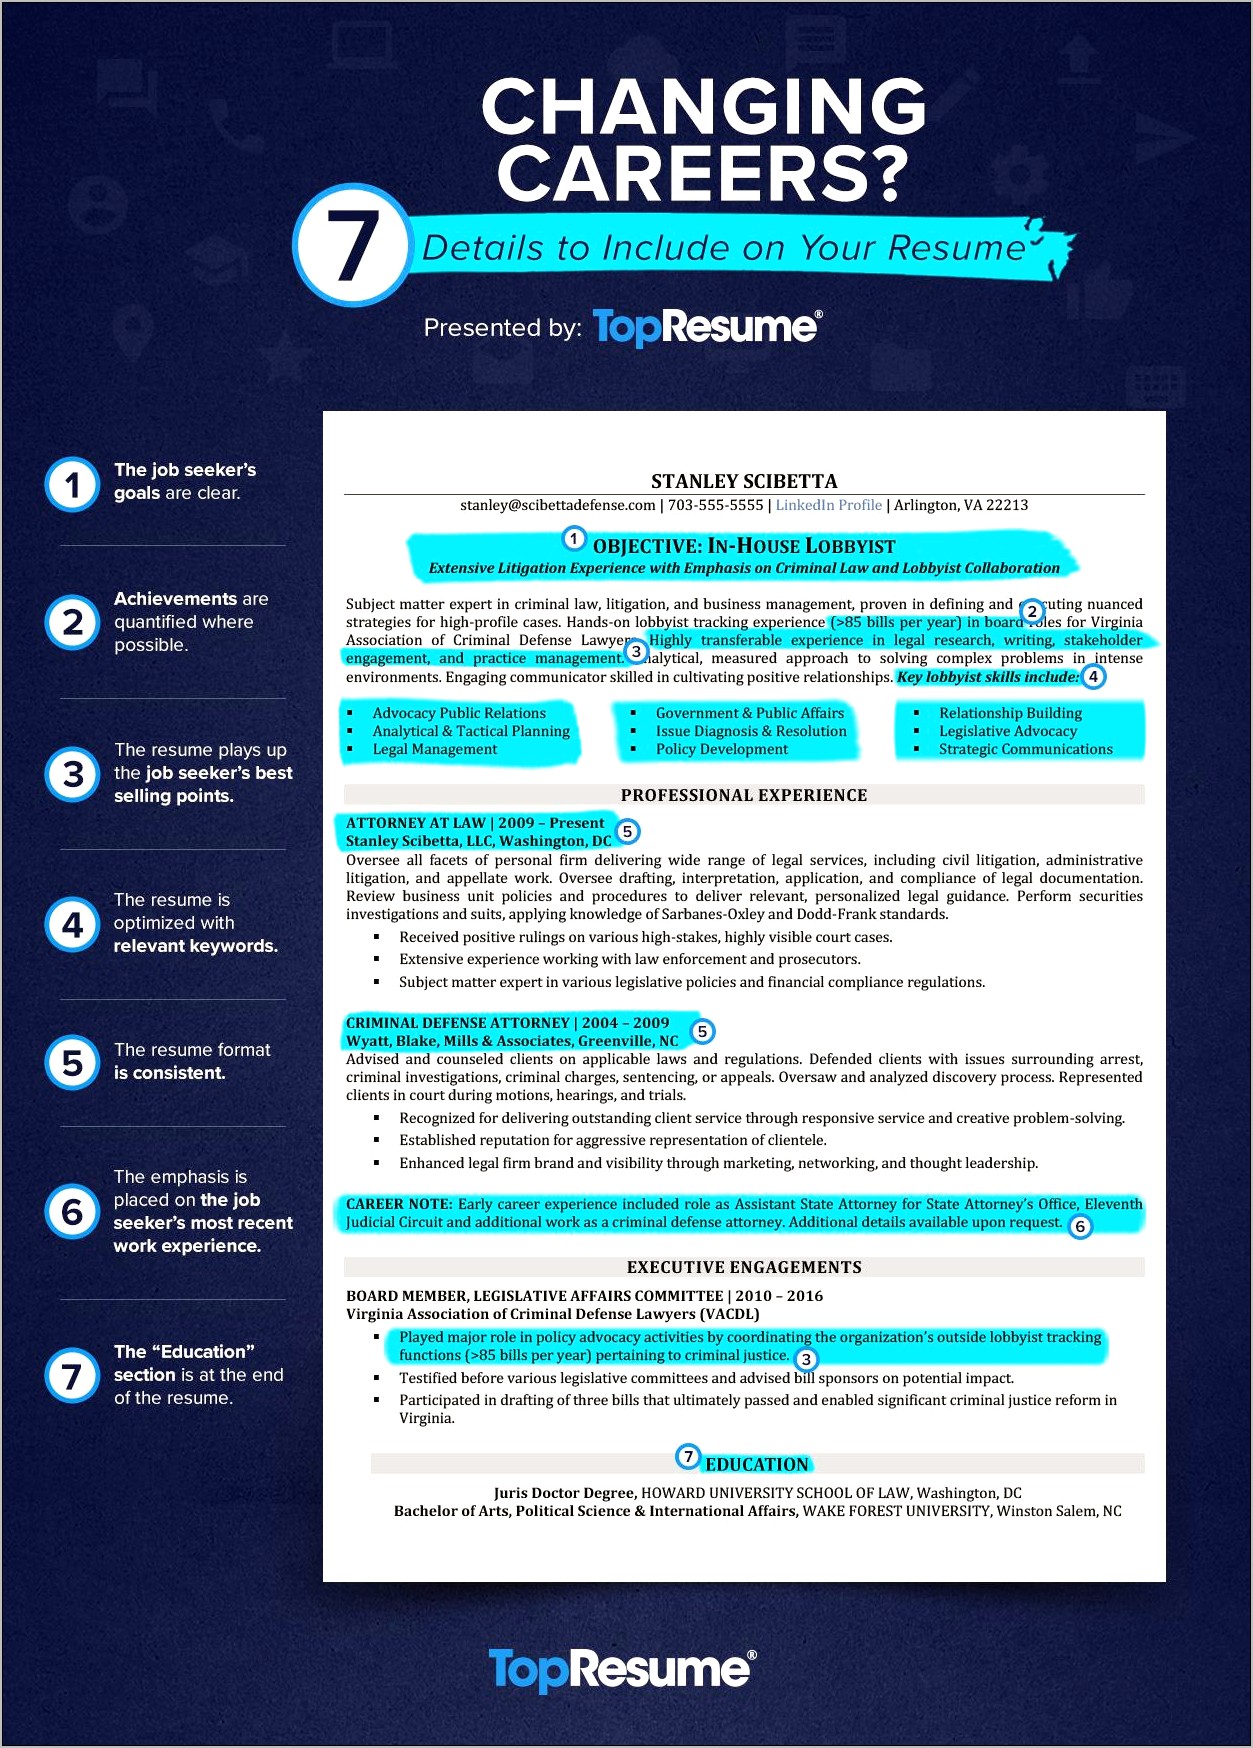 Resume Tips For Changing Jobs